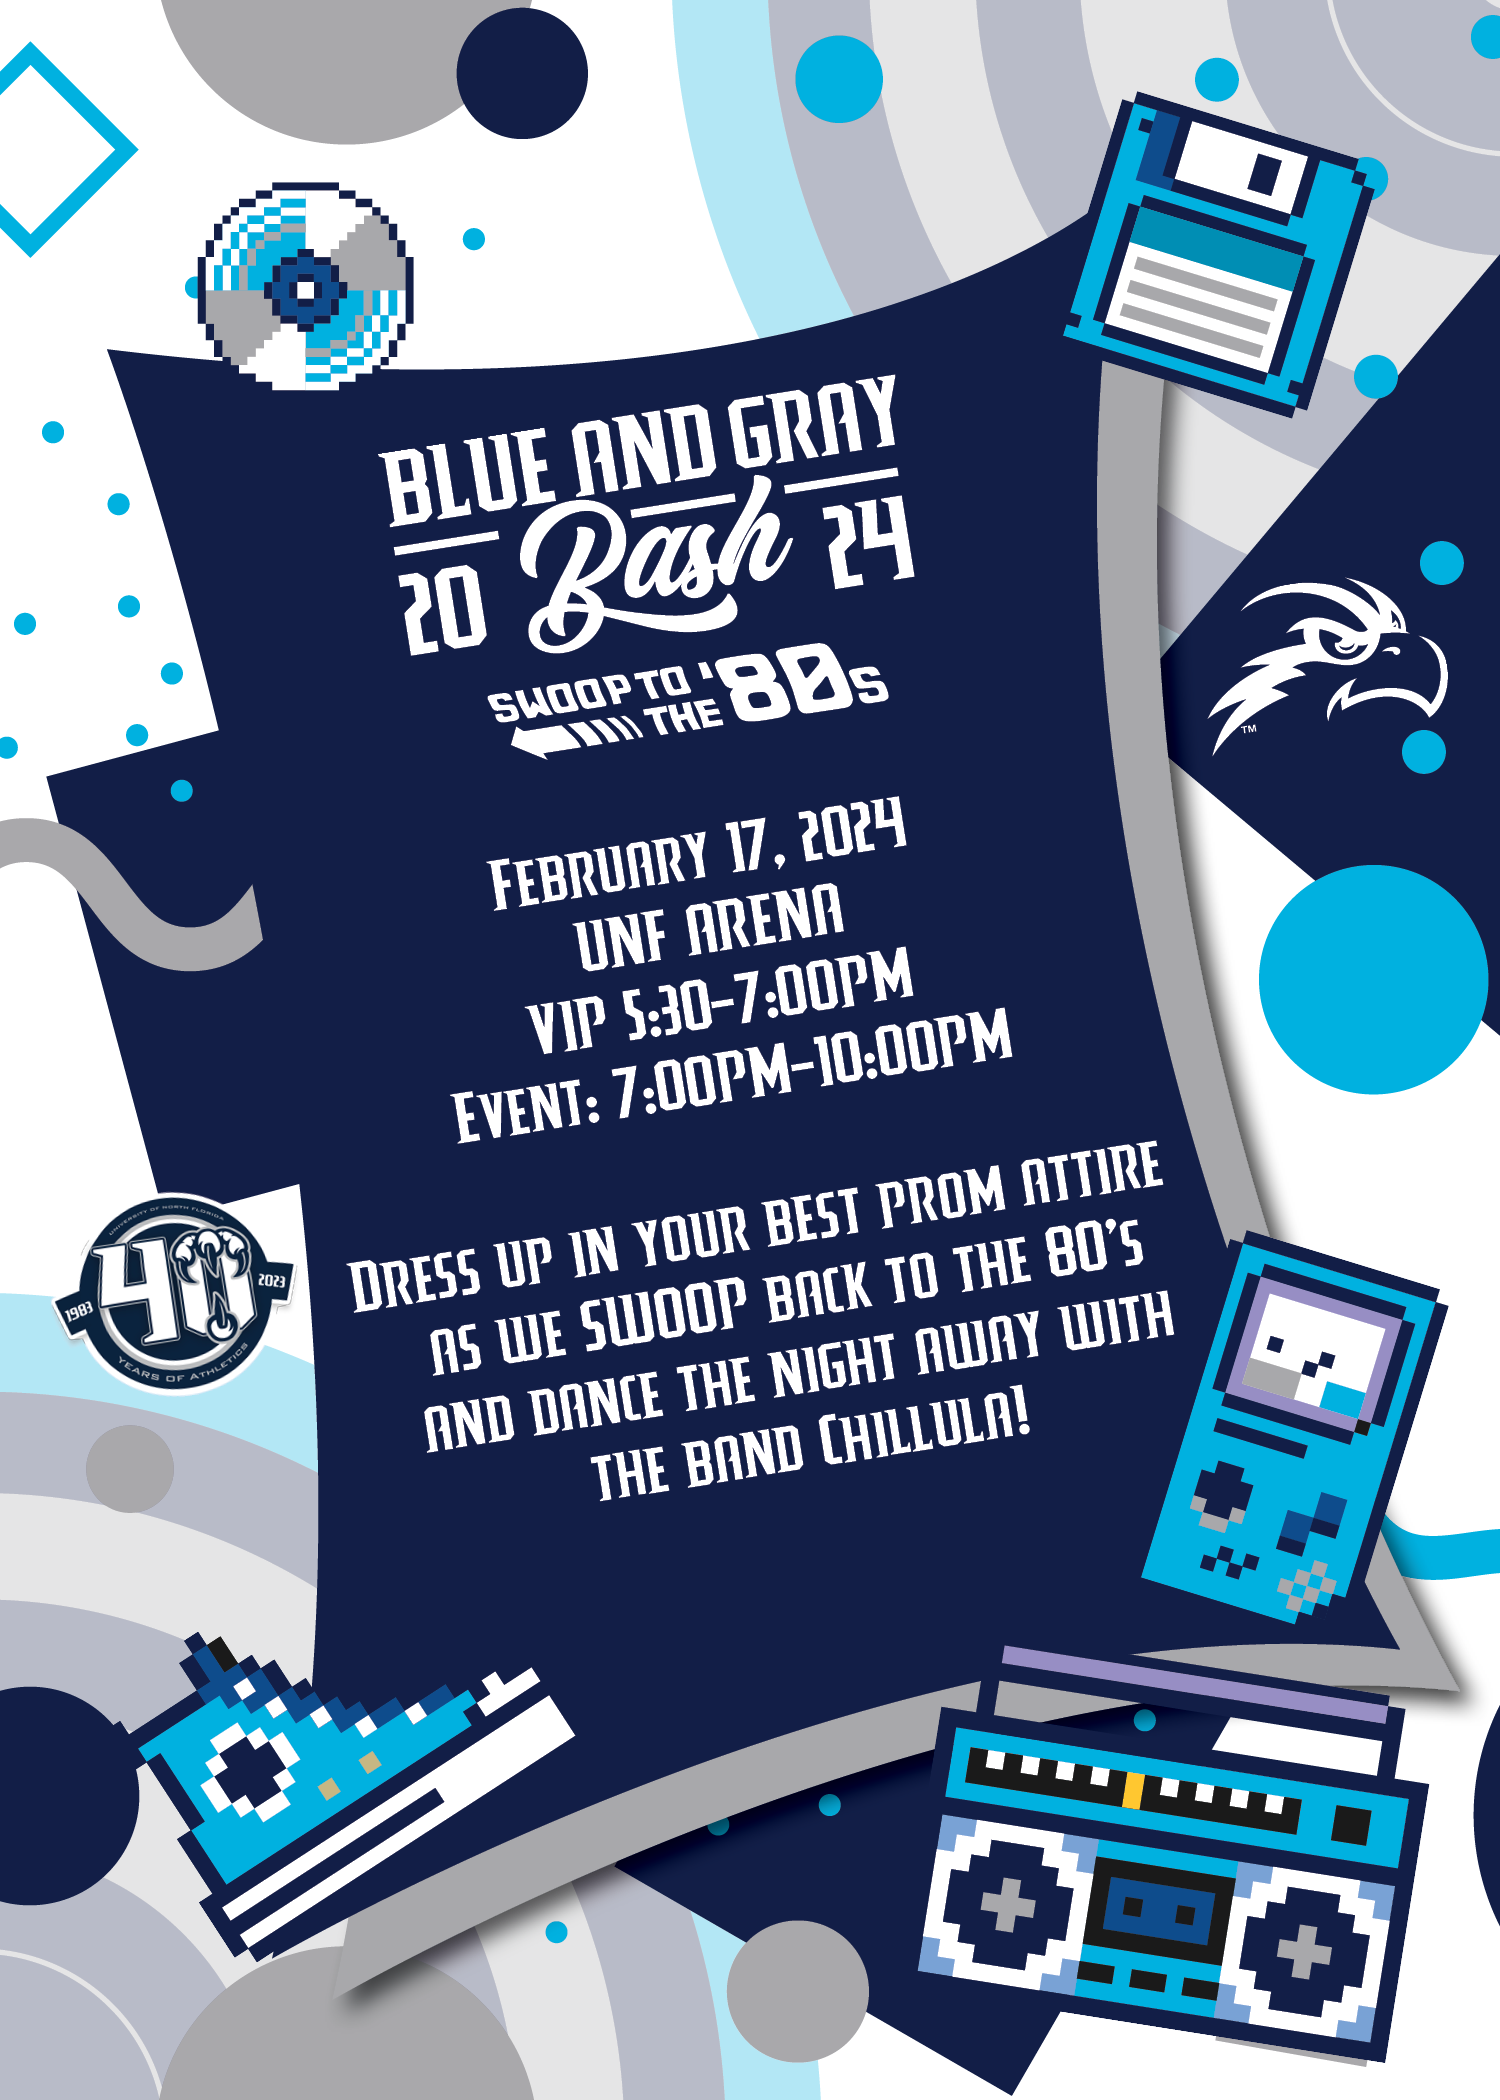 Blue and Gray Bash Save-the-Date Feb 17 UNF Arena